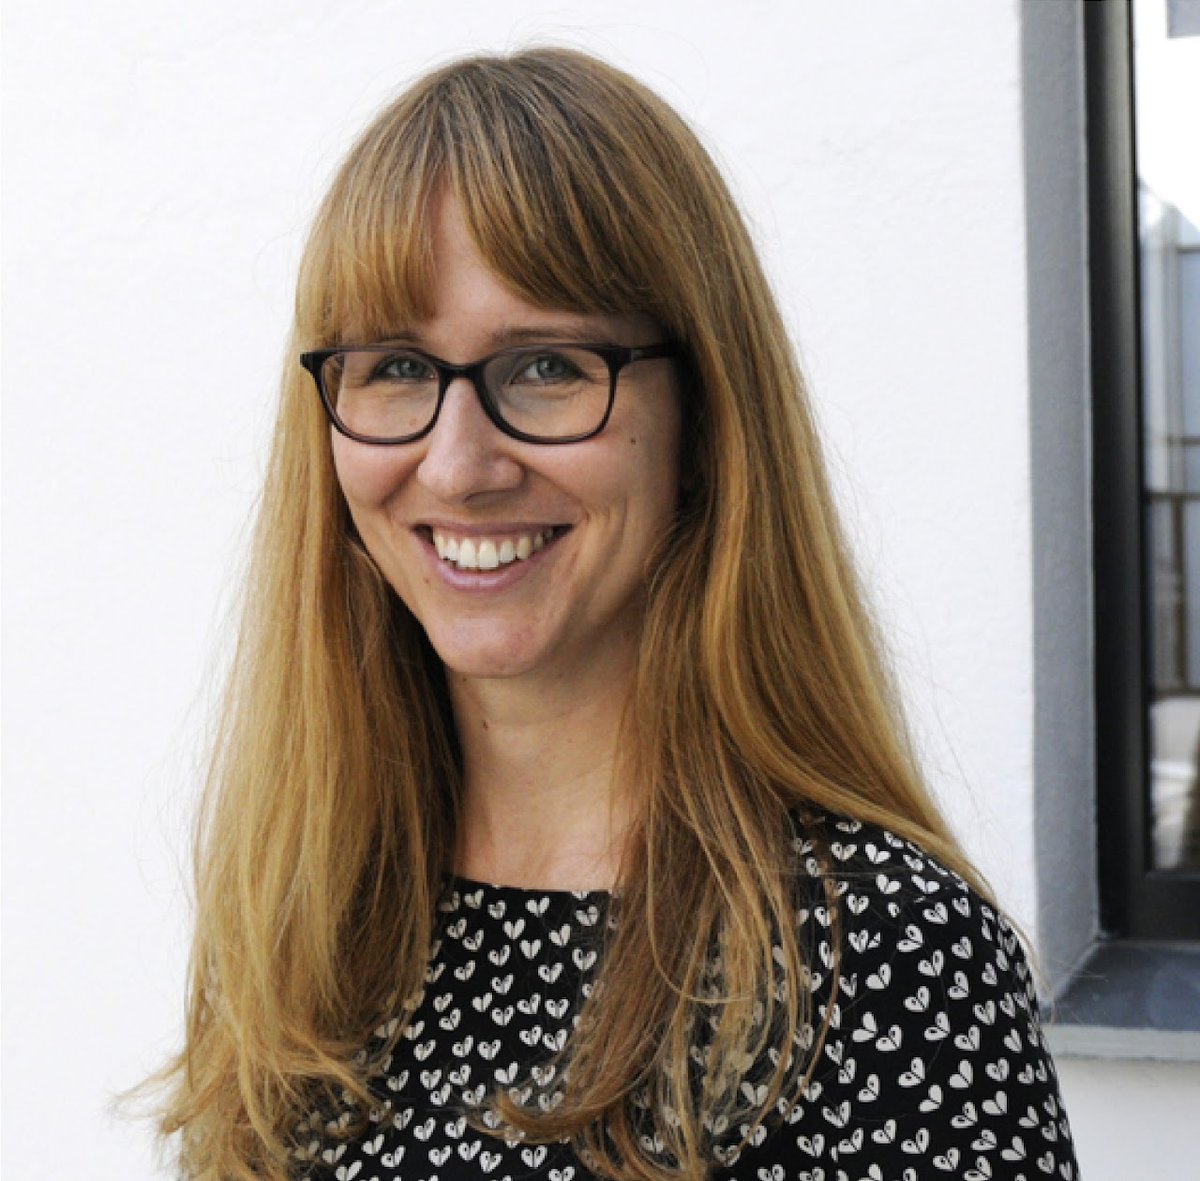 We are delighted to welcome @AlineButikofer of the @NHHnor as a new co-editor. Aline’s expertise lies in family economics, labor economics, health economics, and applied econometrics. We are thrilled to have her on the team.

In addition, we introduce an annual #BestPaperAward,…